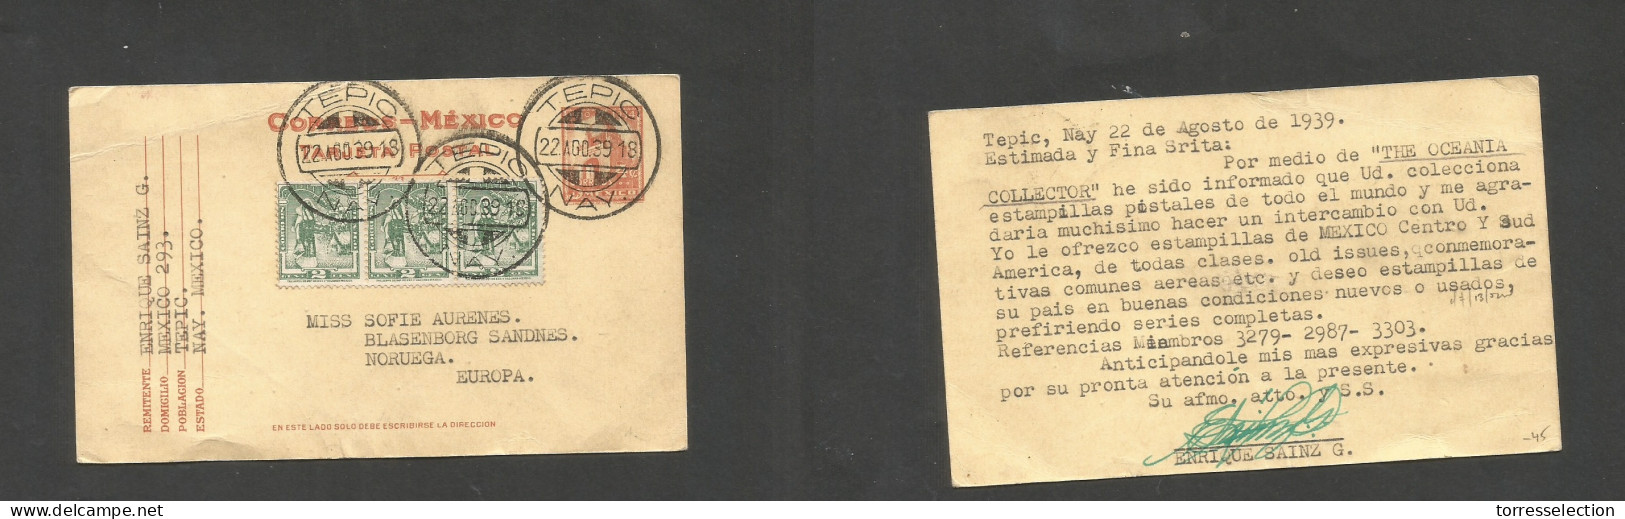 MEXICO - Stationery. 1939 (22 Aug) Tepic, Nay - Norway, Blasenborg. 4c Red Stat Card + 3 Adtls, At 10c Rate, Tied Cds. X - Mexico